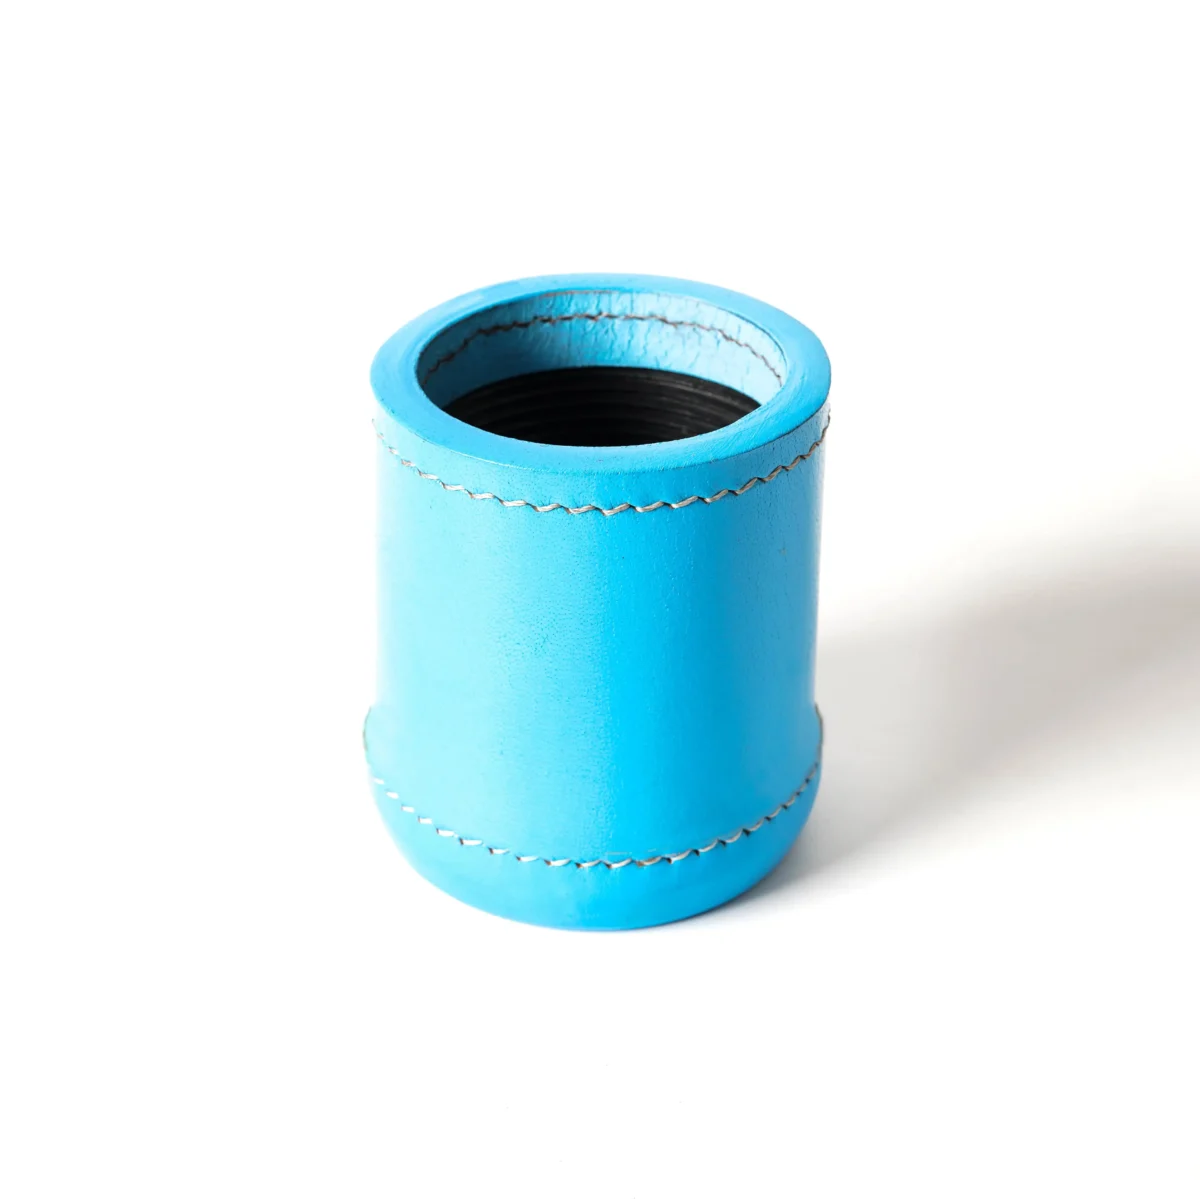 leather dice cup, blue leather dice shaker, ribbed interior leather dice cup quiet while shaking